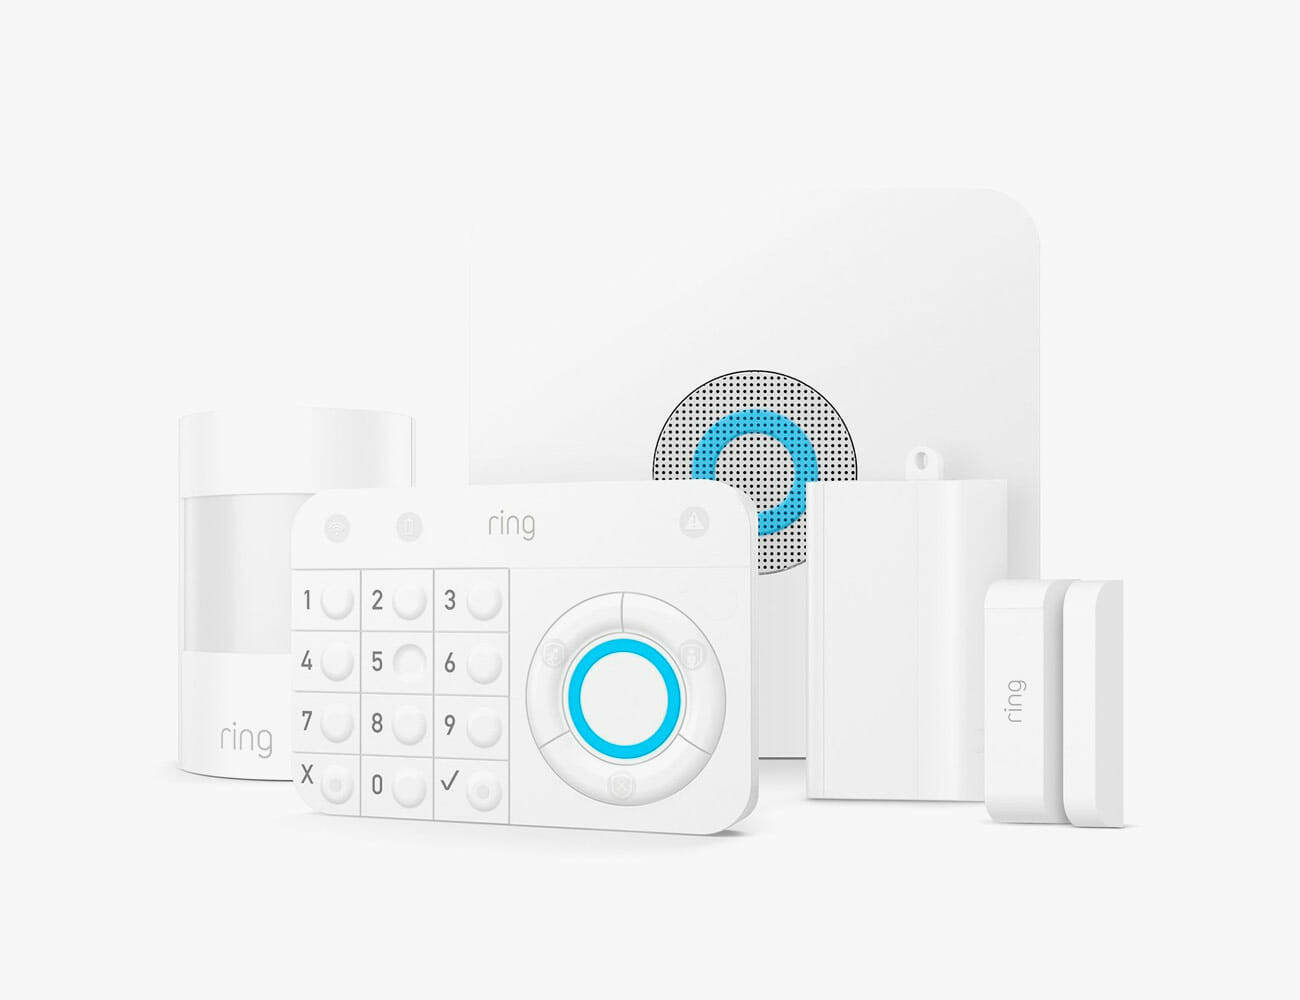 Best DIY Home Security System 2019
 The Best Smart Alarm Systems That You Can Install Yourself